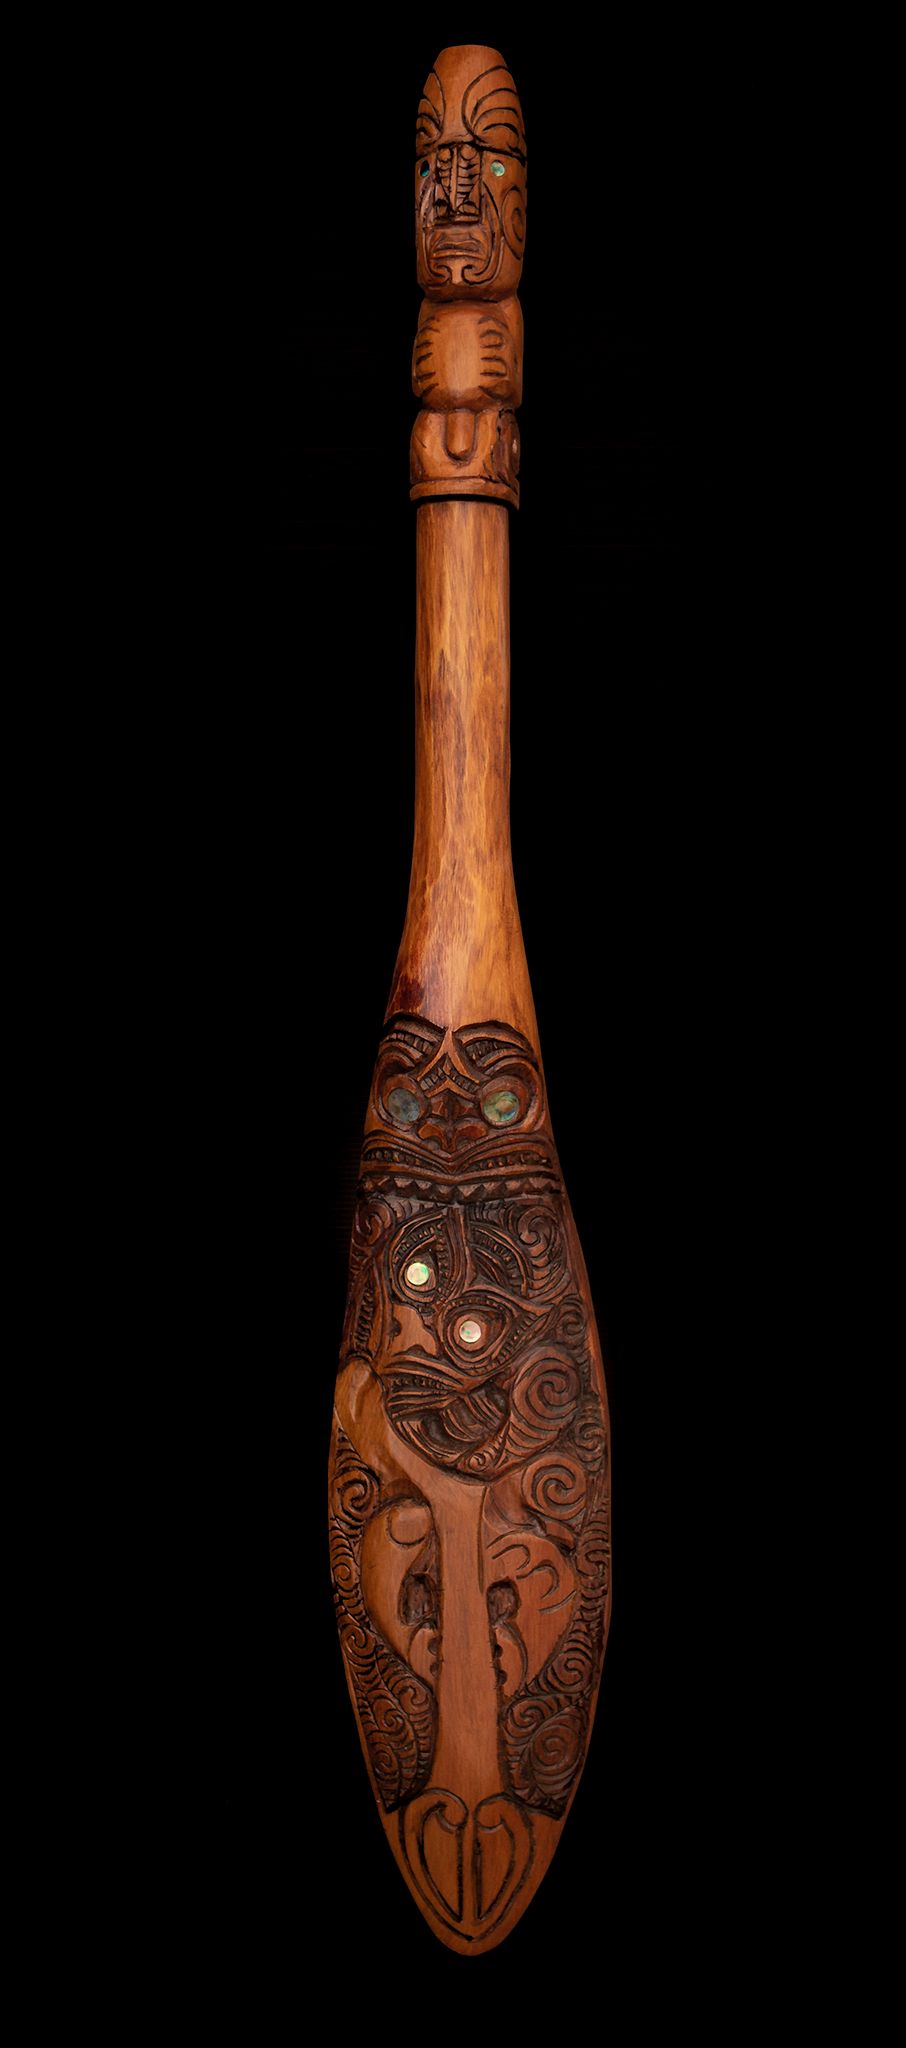 New Zealand Maori Waka Hoe Paddle Carving by Grant Holder Silver Fern Gallery